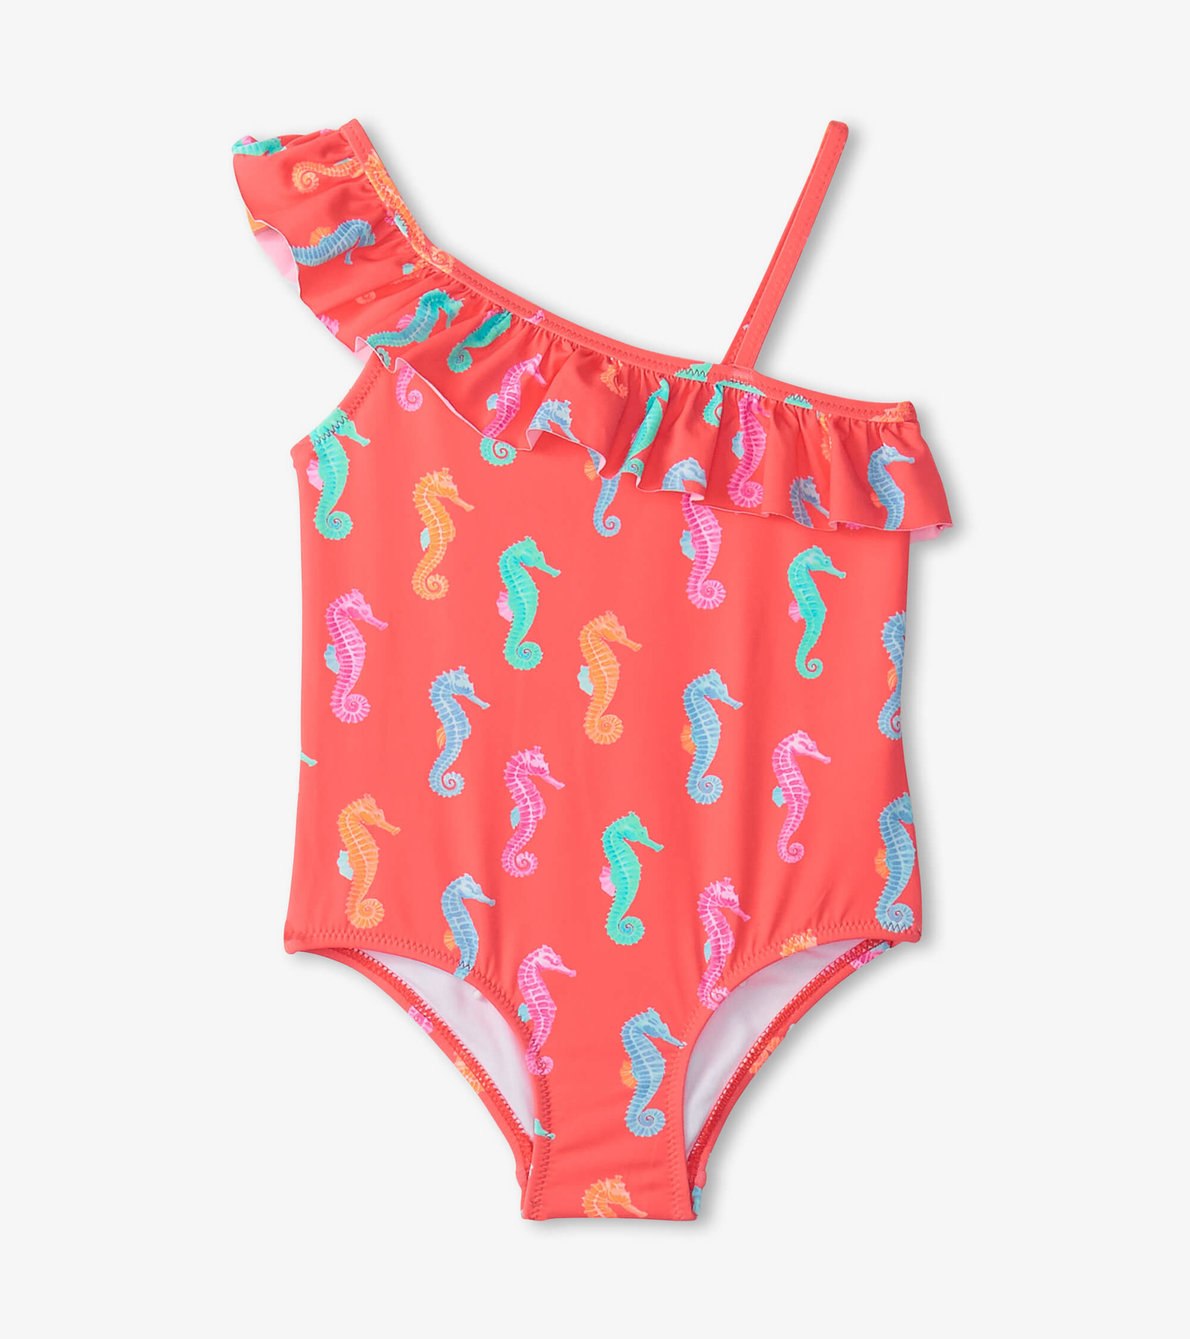 View larger image of Girls Painted Sea Horses Ruffle Trim Swimsuit